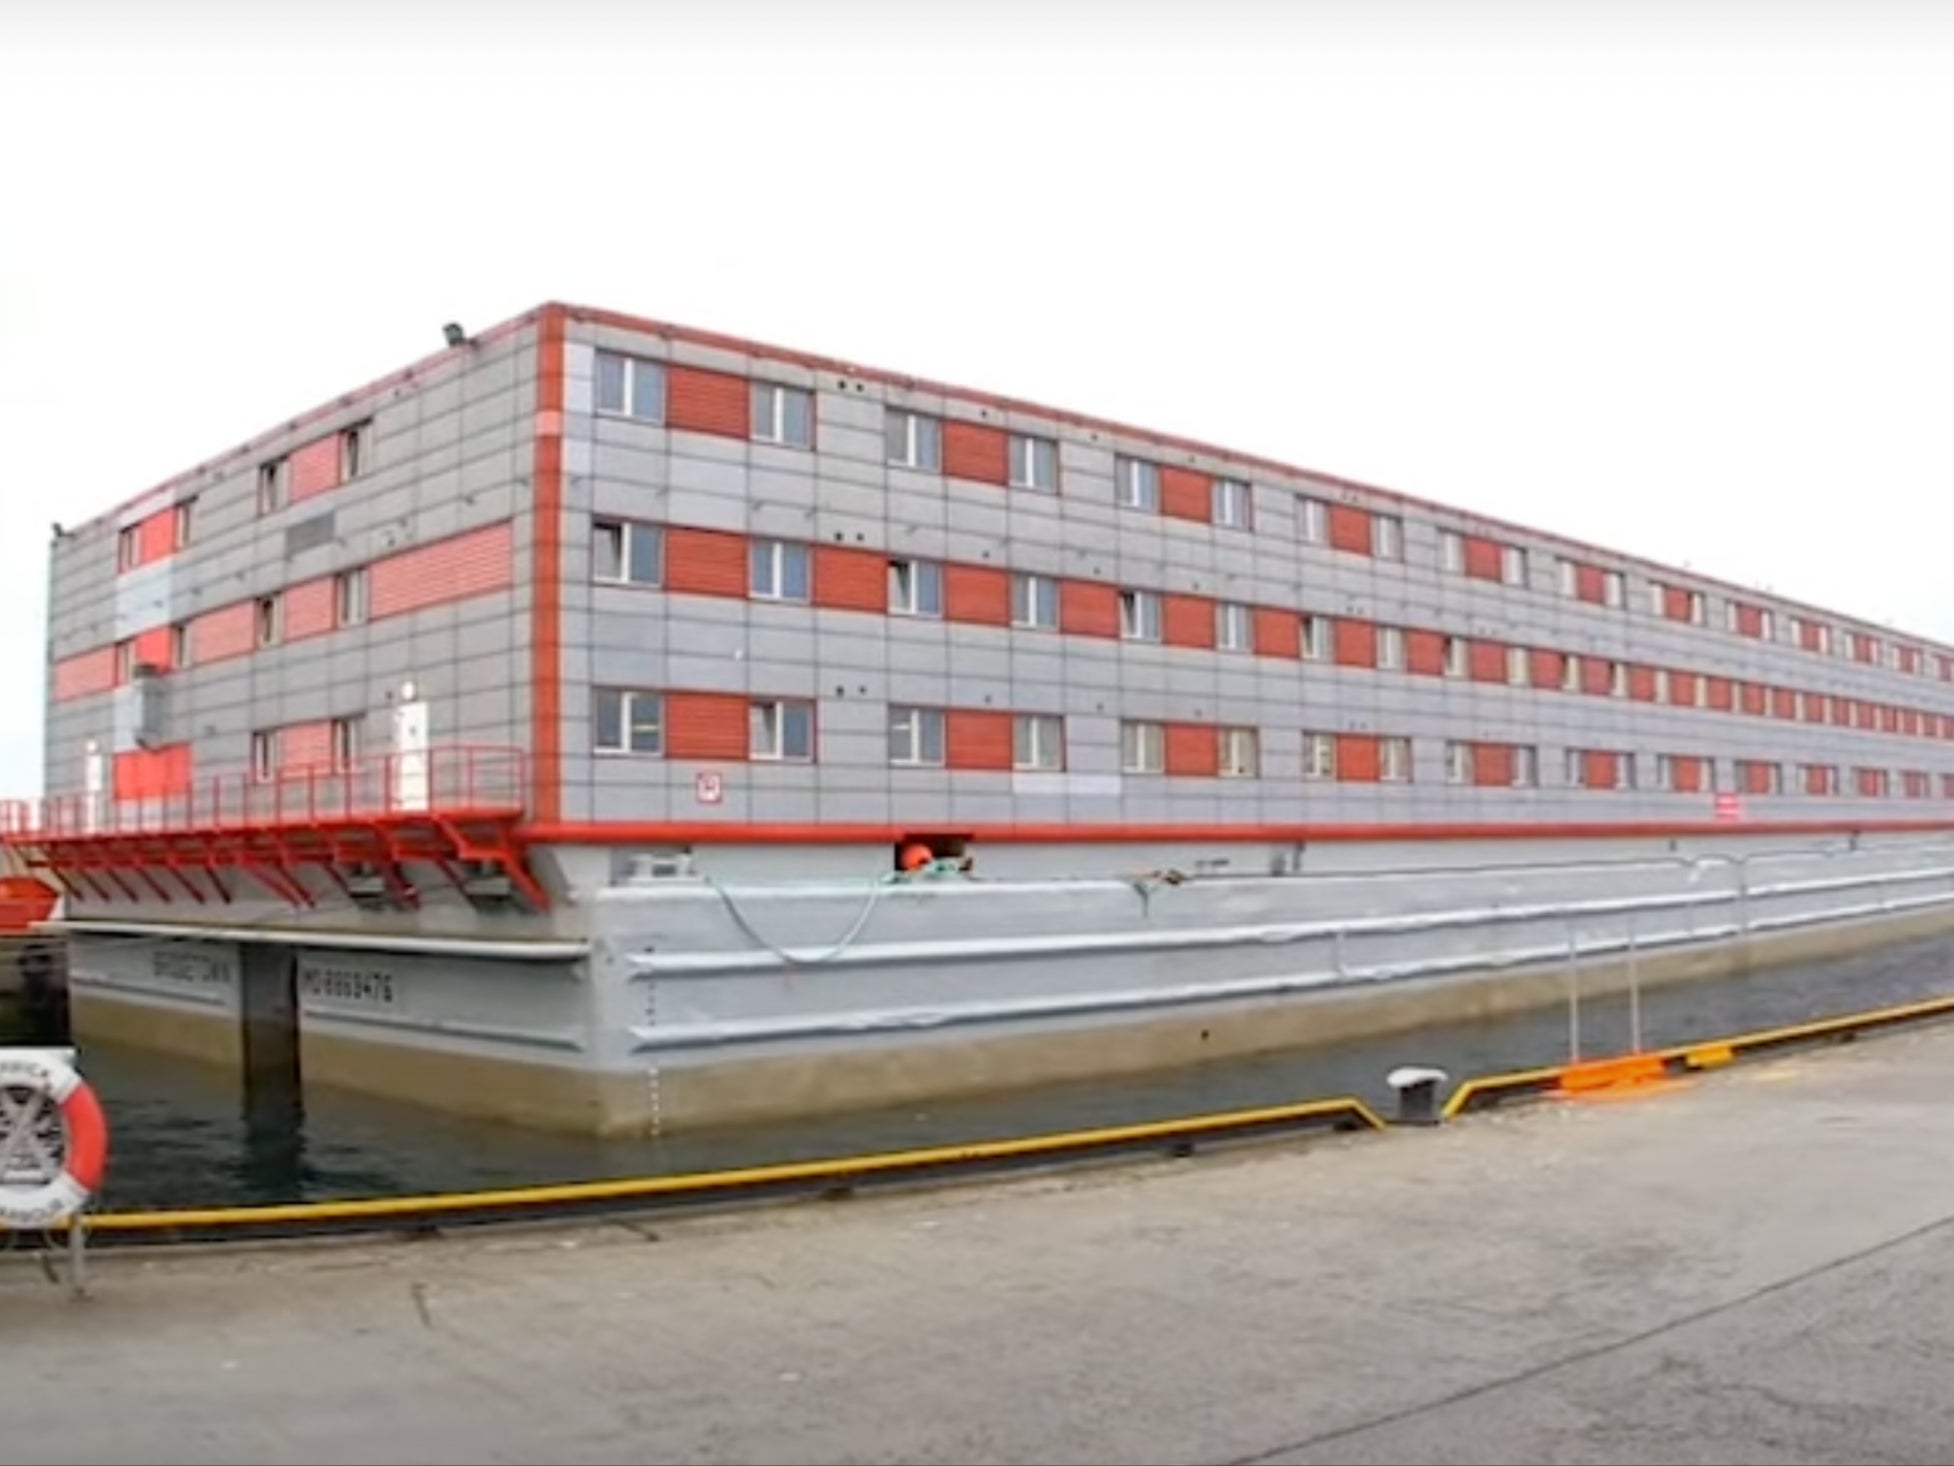 ‘Bibby Stockholm’ was previously used to house asylum seekers in the Netherlands